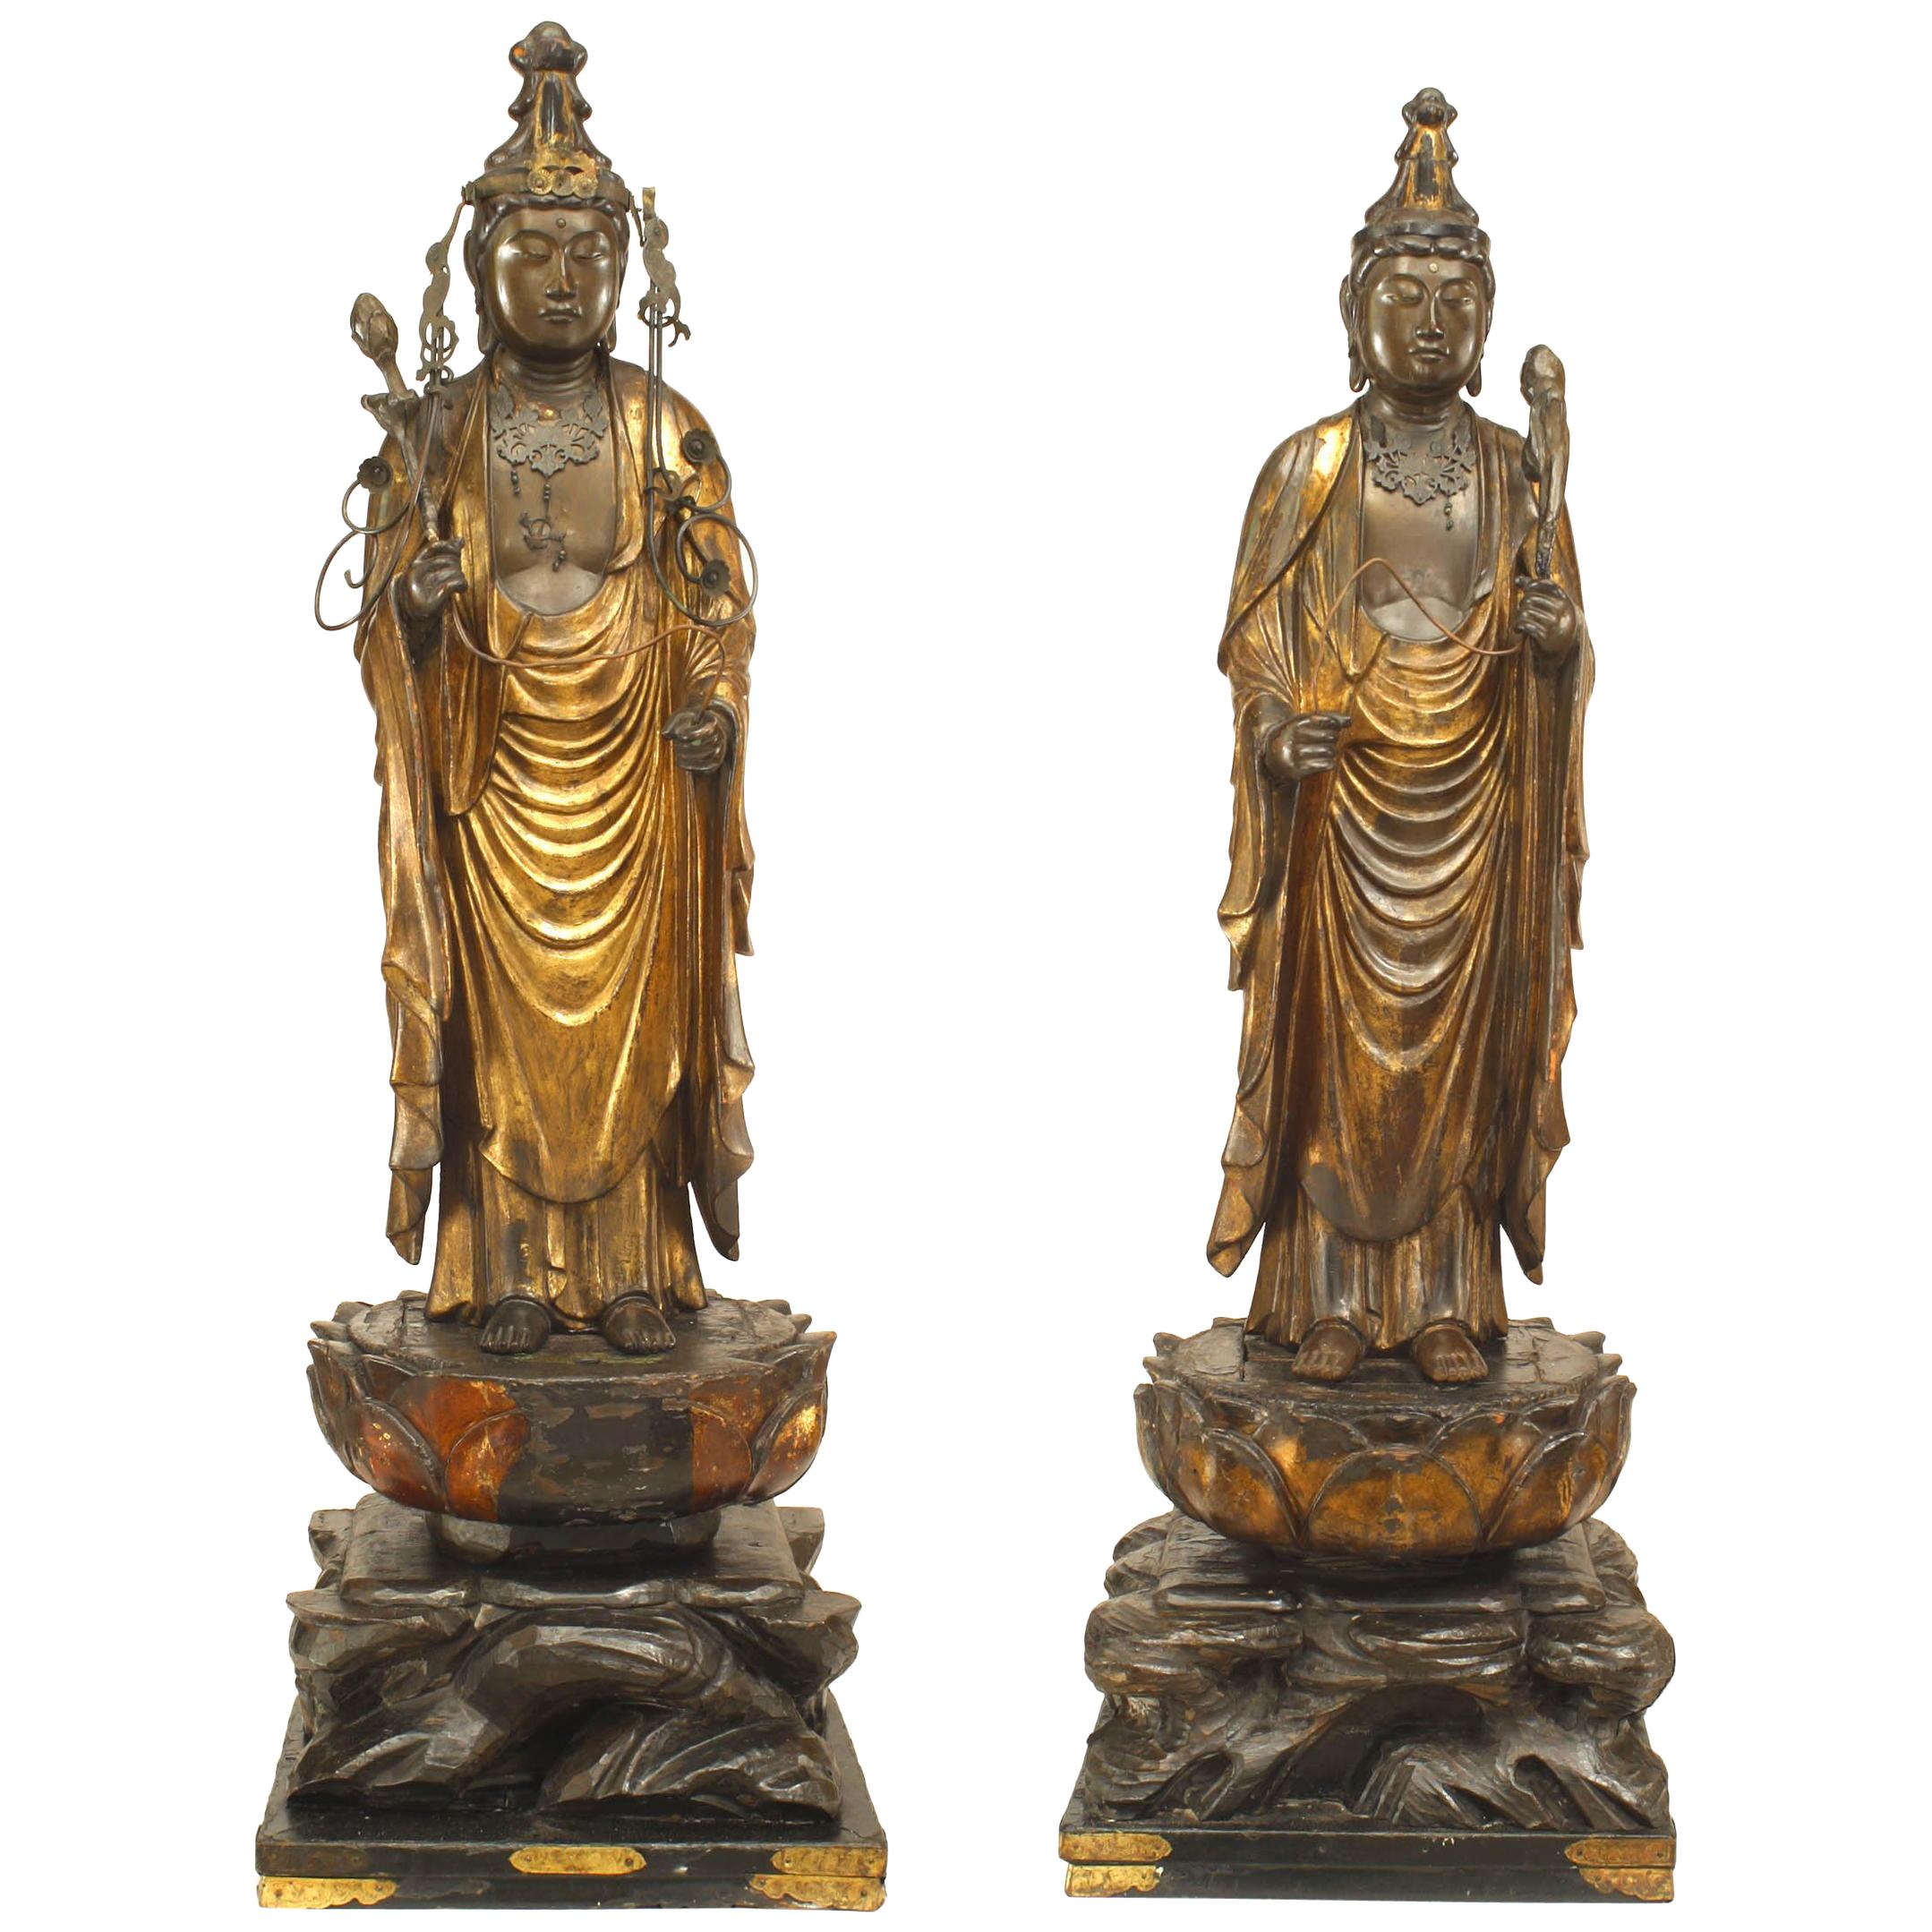 Pair of Chinese Gilt Deity Figures